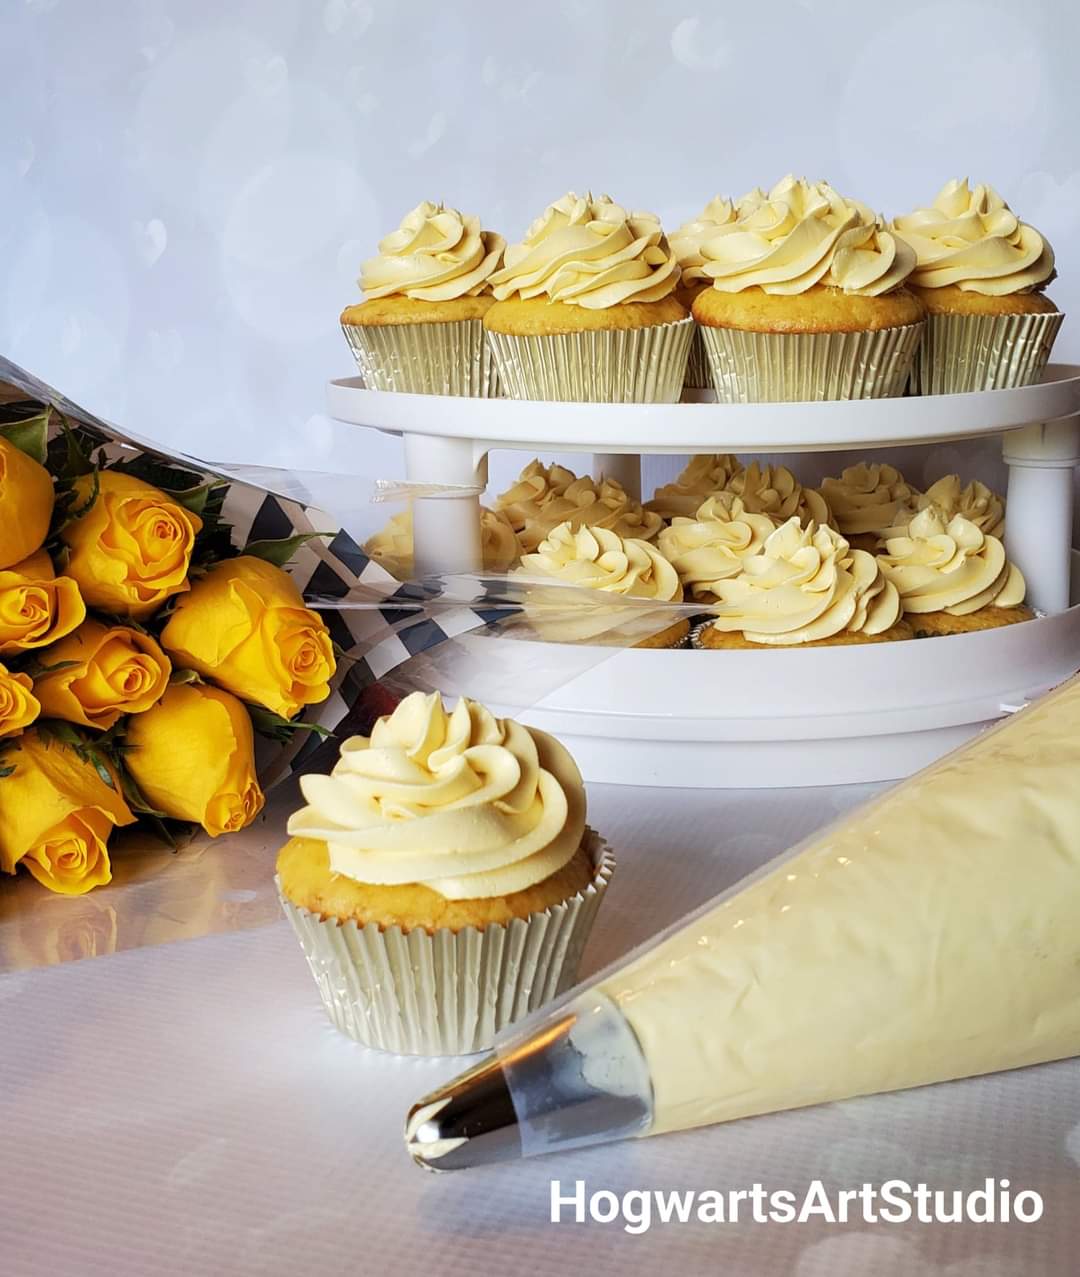 Slughorn's Pineapple Frosted Pineapple Cupcakes Recipe - instant download!